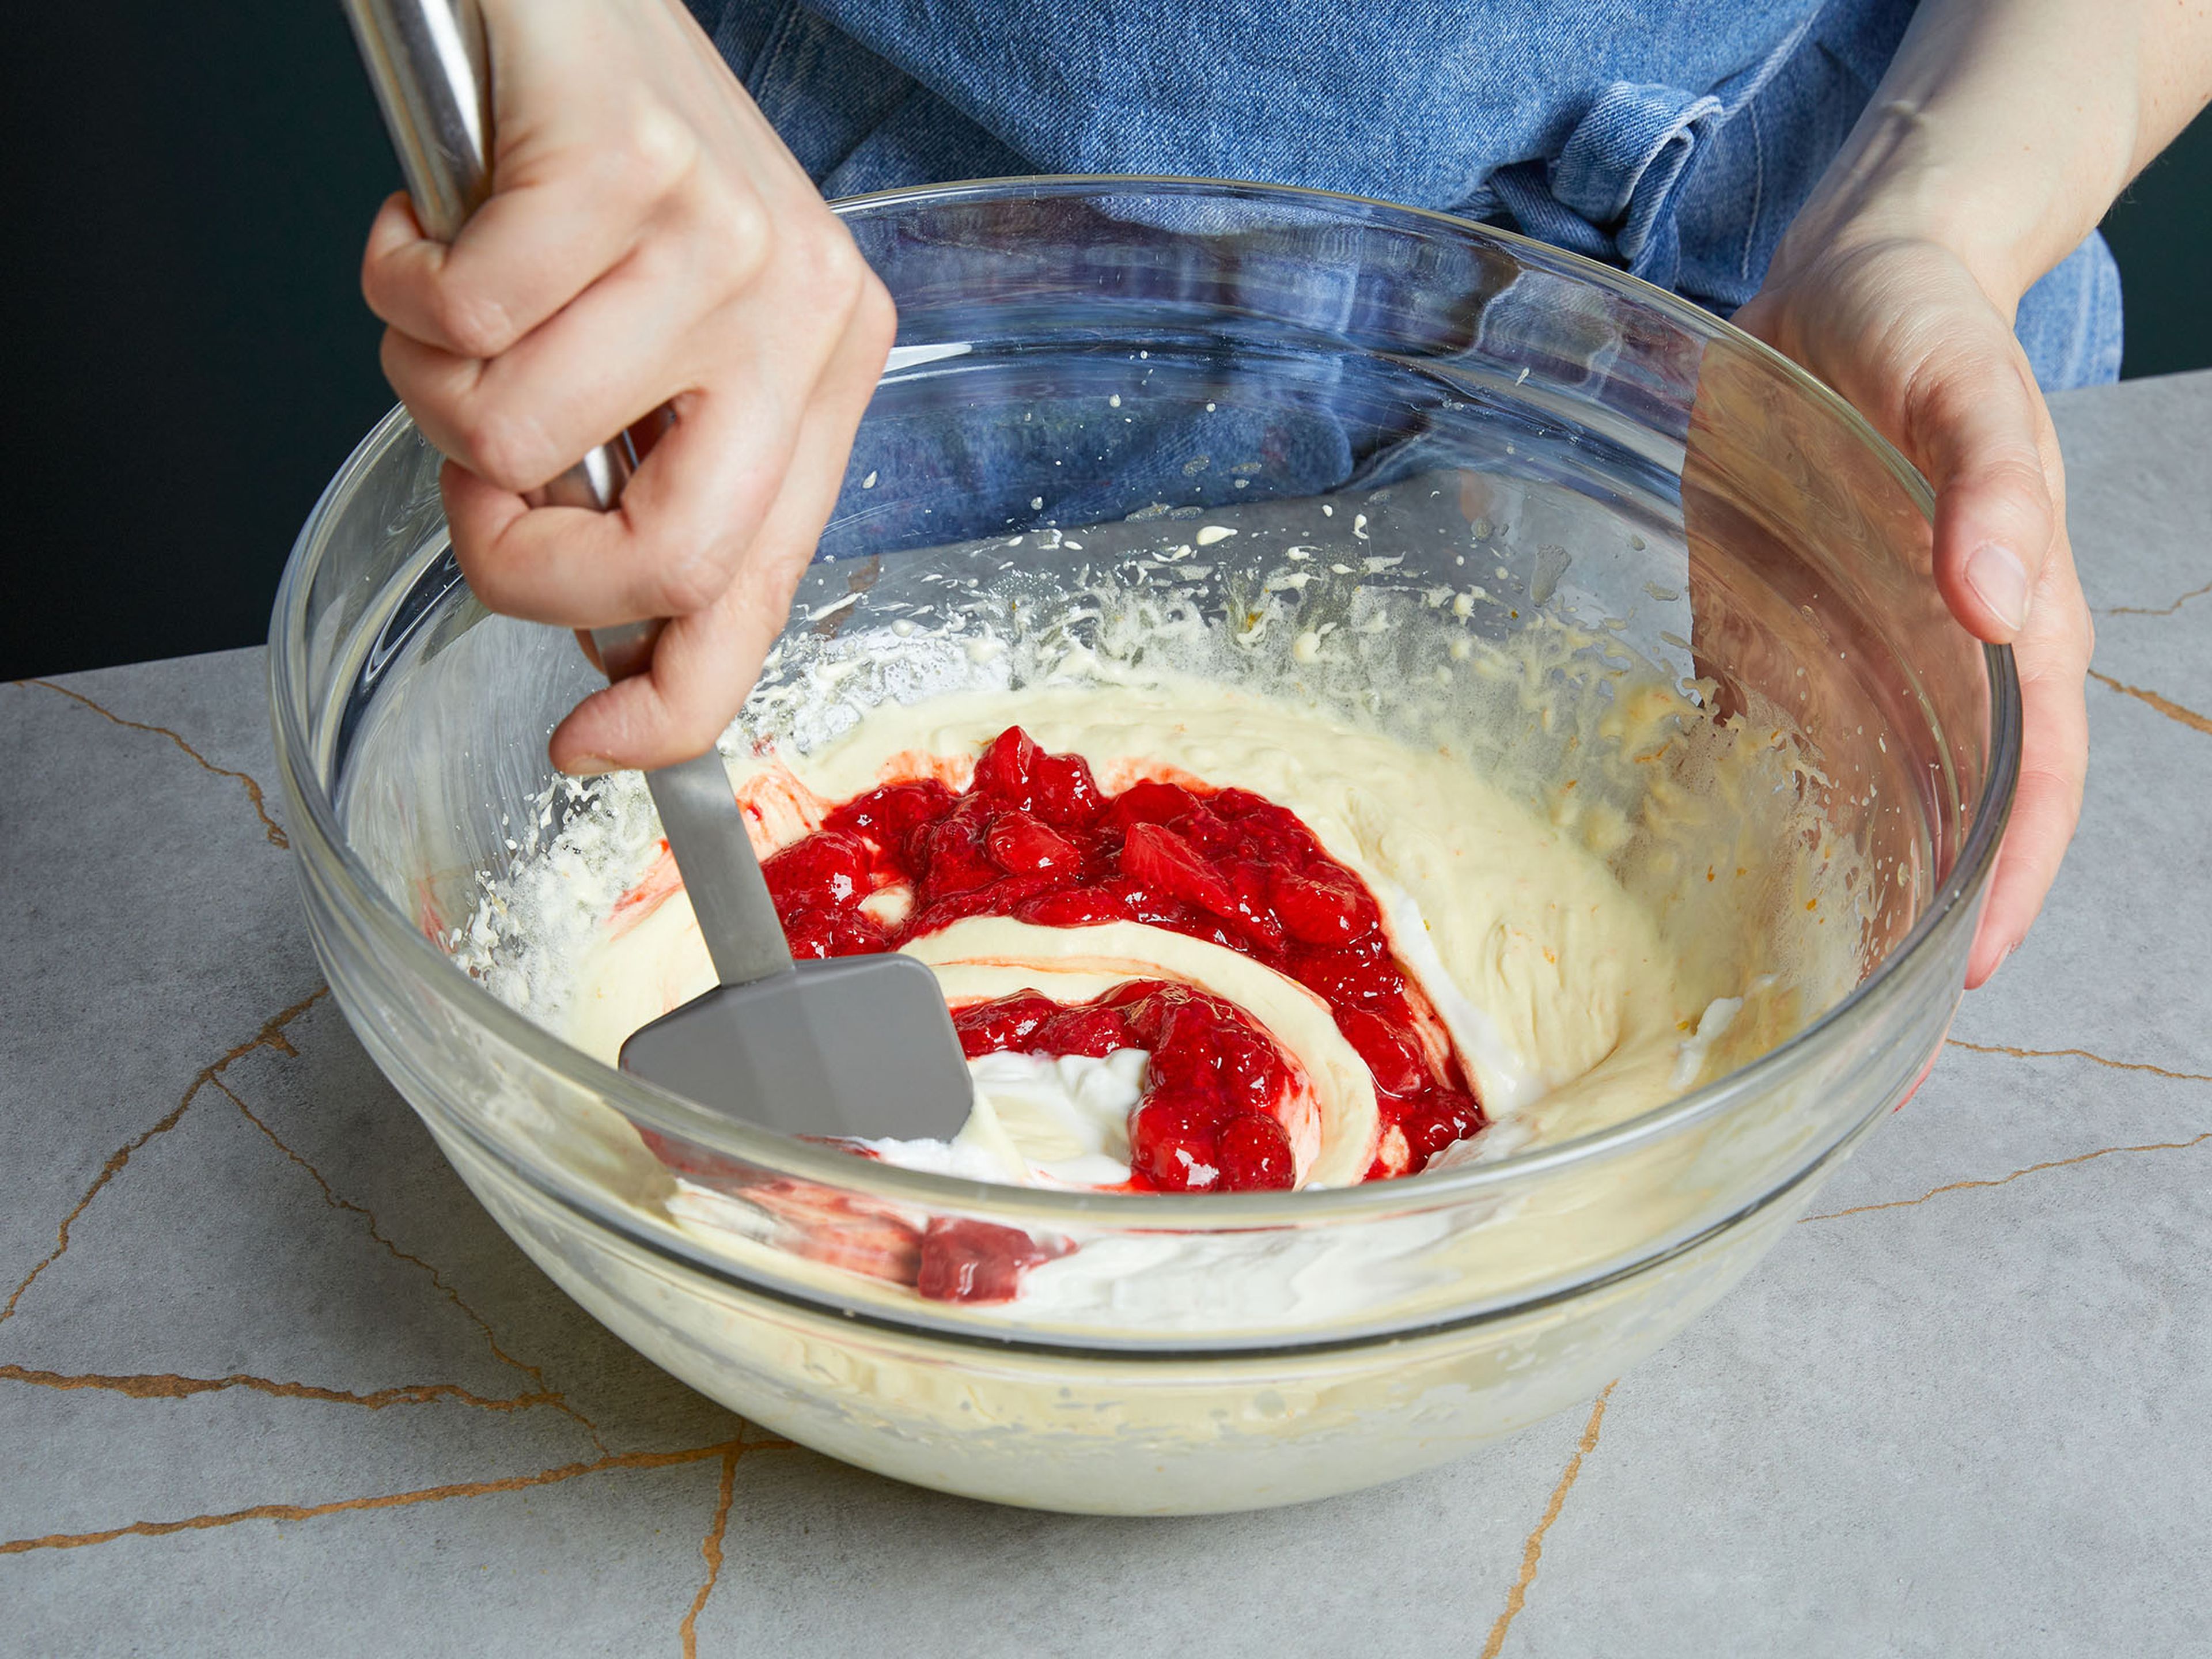 Preheat the oven to 180°C/356°F. Mix flour, baking powder, and salt in a large bowl. In another bowl, whisk sugar, melted butter, orange zest, vanilla extract, and eggs for approx. 1 min. until light and fluffy. Add yogurt and strawberry compote and mix. Then fold into the flour mixture and add half of the remaining strawberries, setting some aside for decorating the top. Be careful not to overmix the dough.